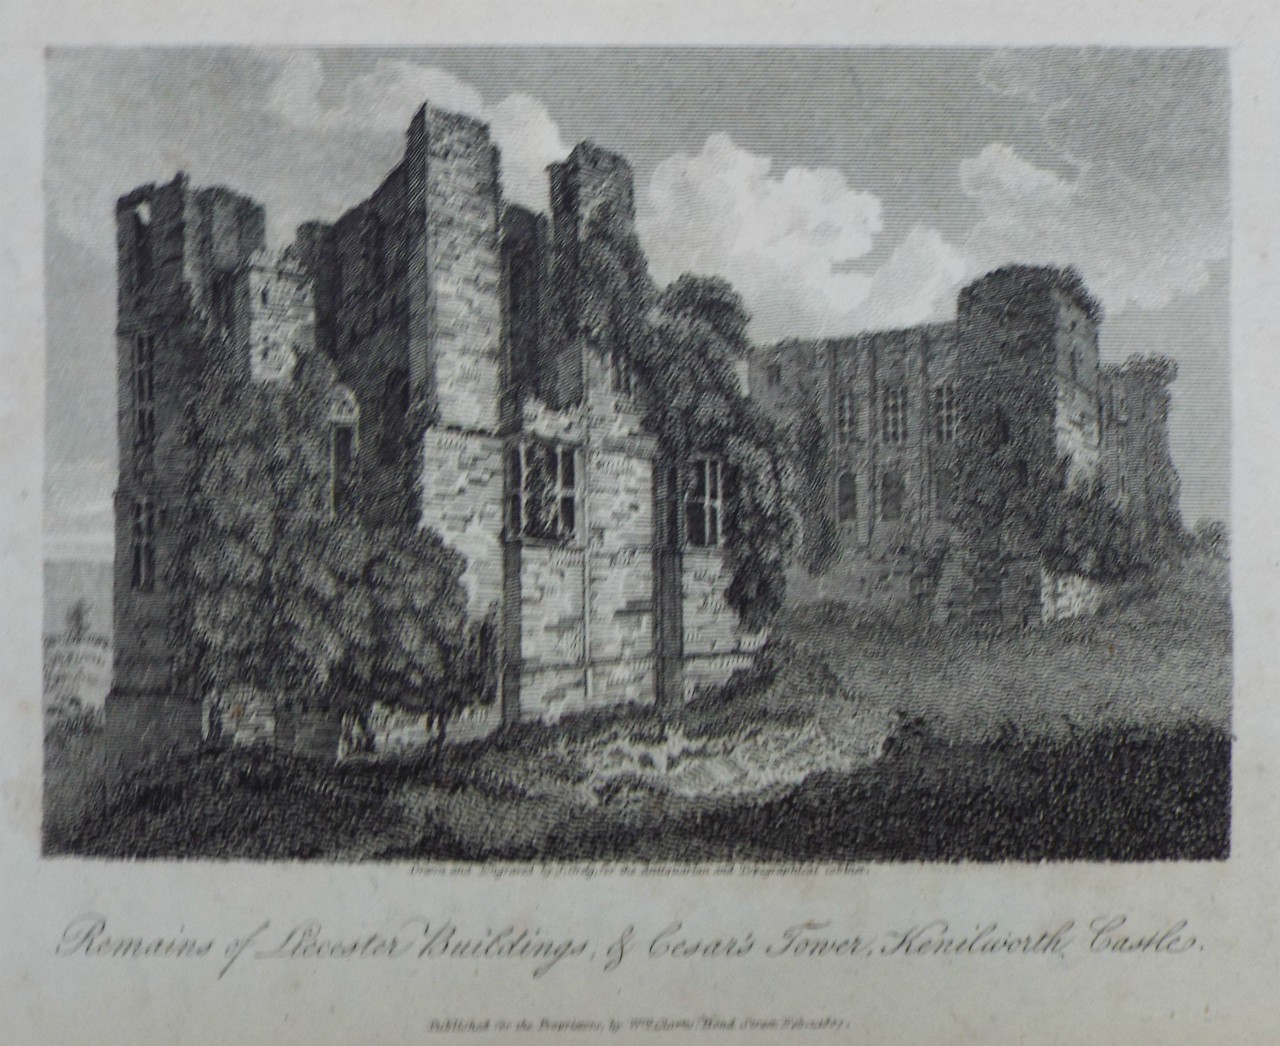 Print - Remains of Leicester Buildings, & Cesar's Tower, Kenilworth Castle. - Greig